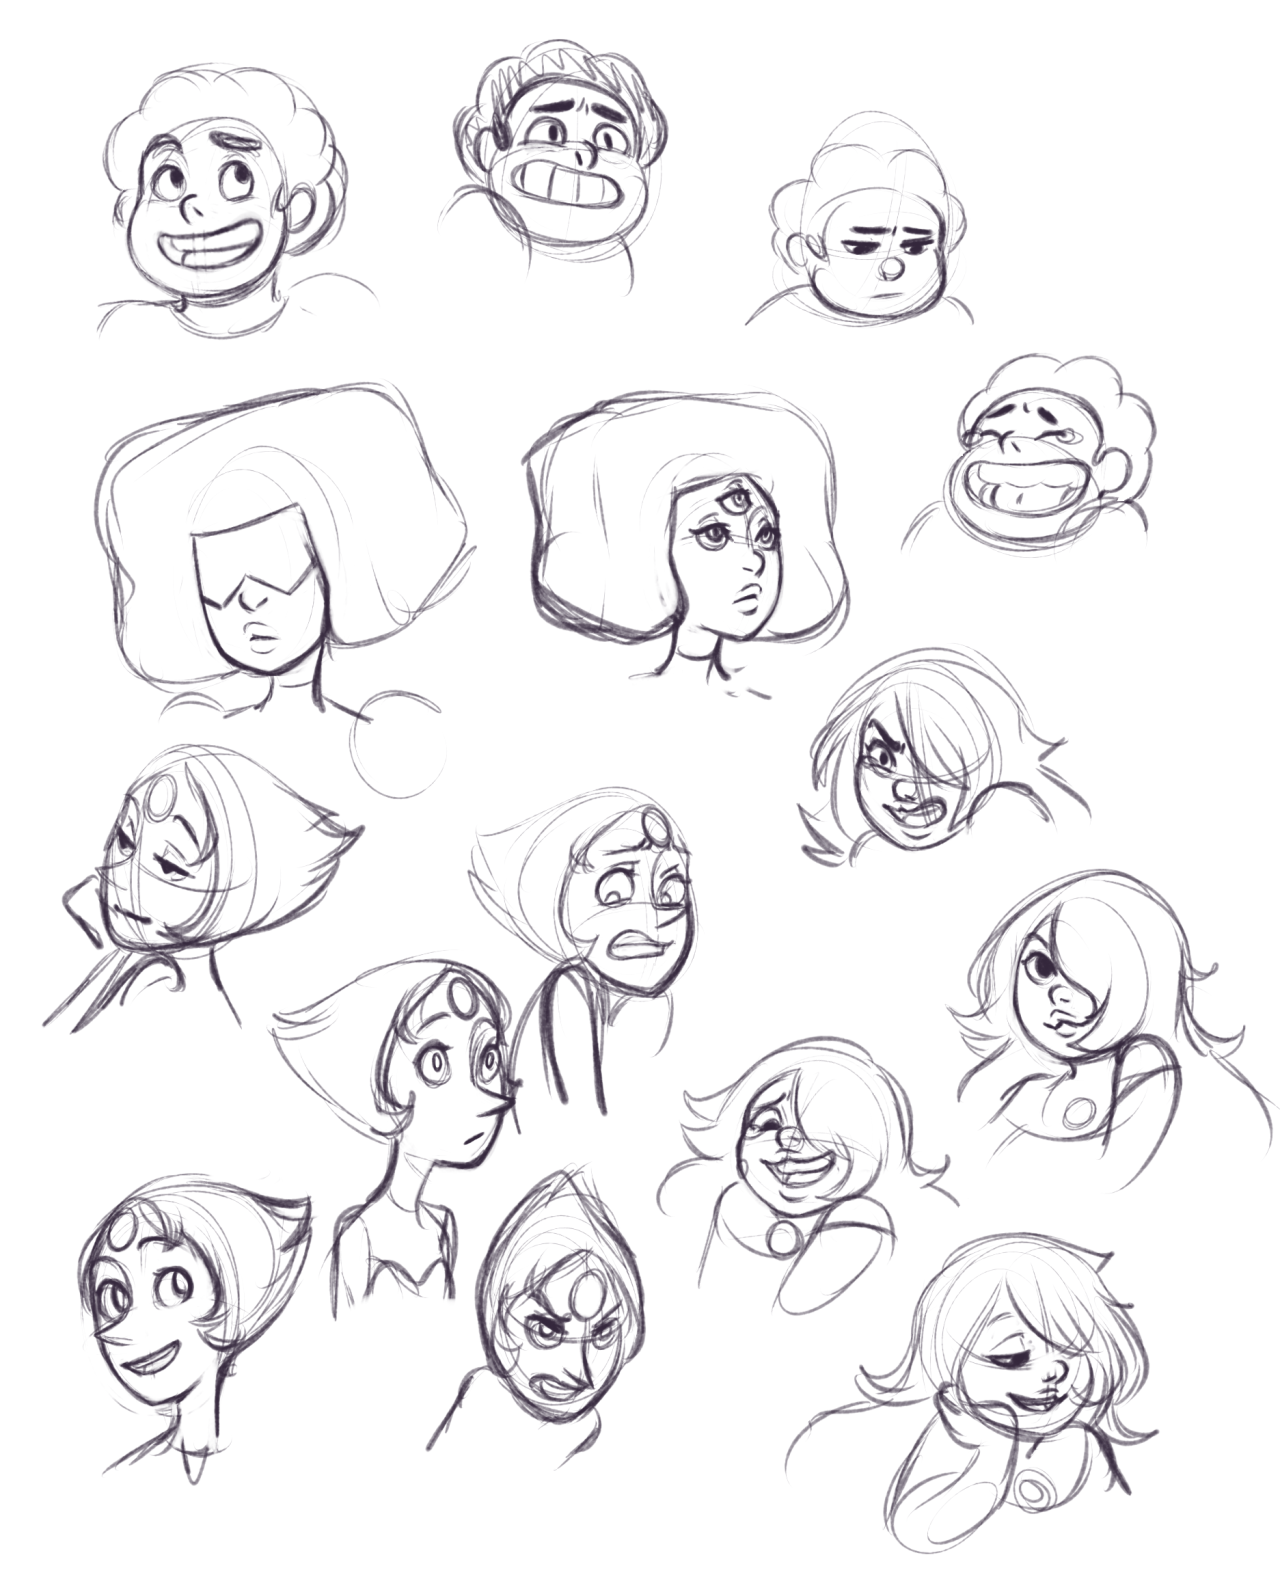 rendigo:  I’m trying to figure out how to draw the Steven Universe cast a little